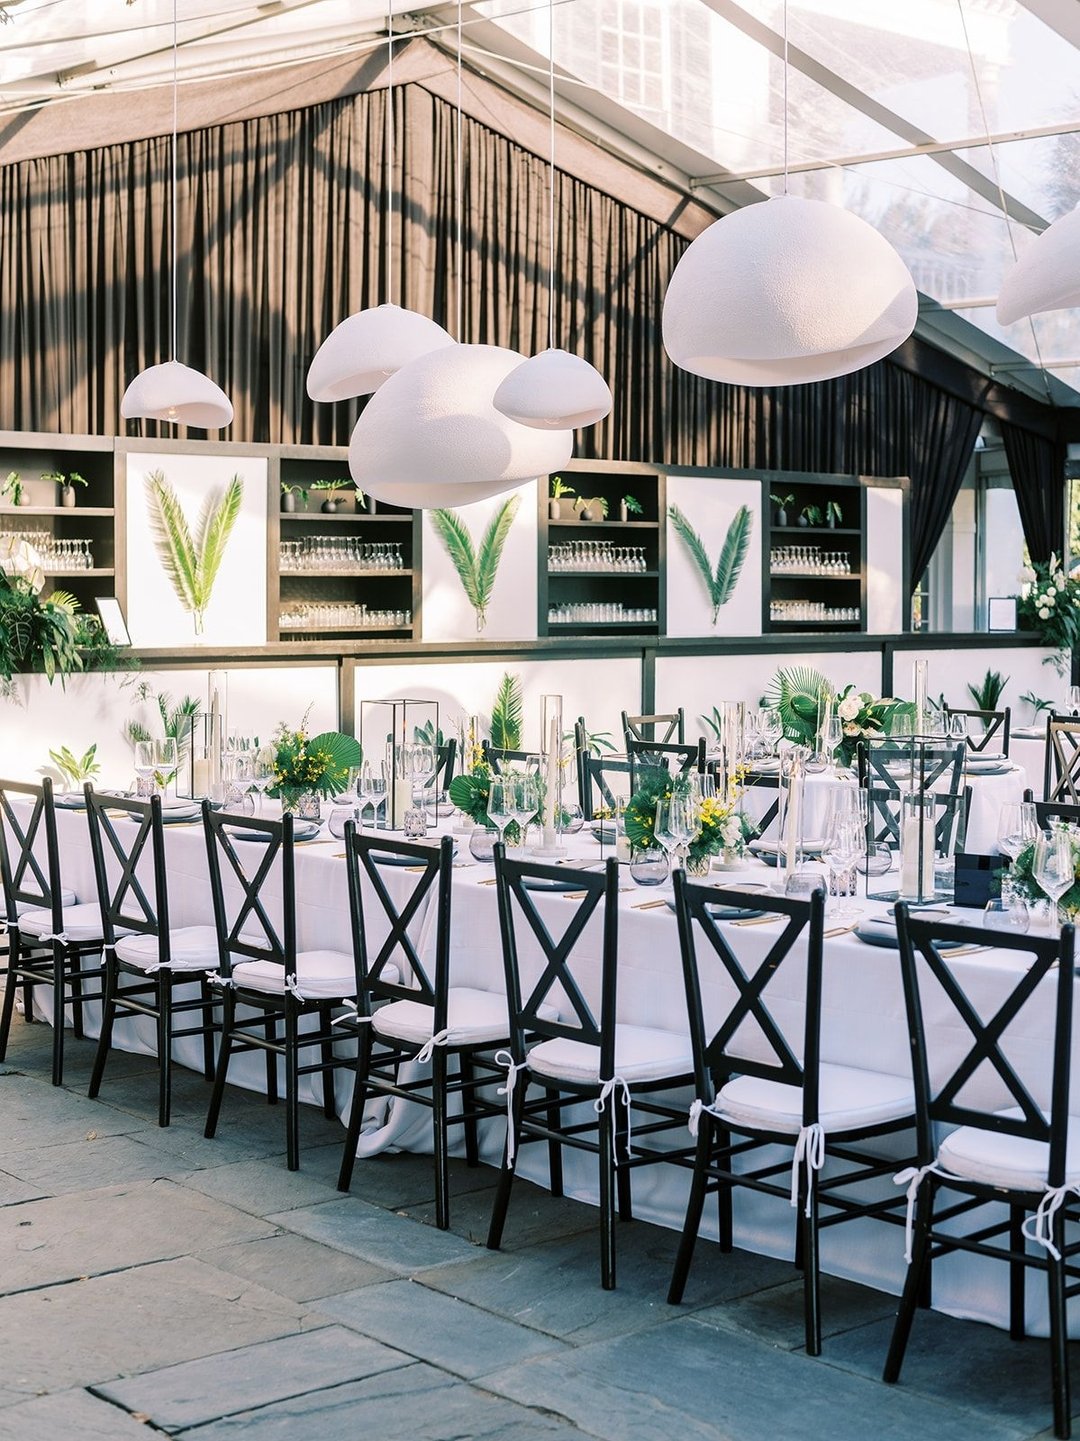 This modern design creates the perfect equilibrium: monochromatic colors + structured masculine lines paired with a more relaxed, feminine feel through loose florals + curved lighting fixtures 🖤🌿🤍
.
.
.
#moderndesign #modernwedding #monochromatic 